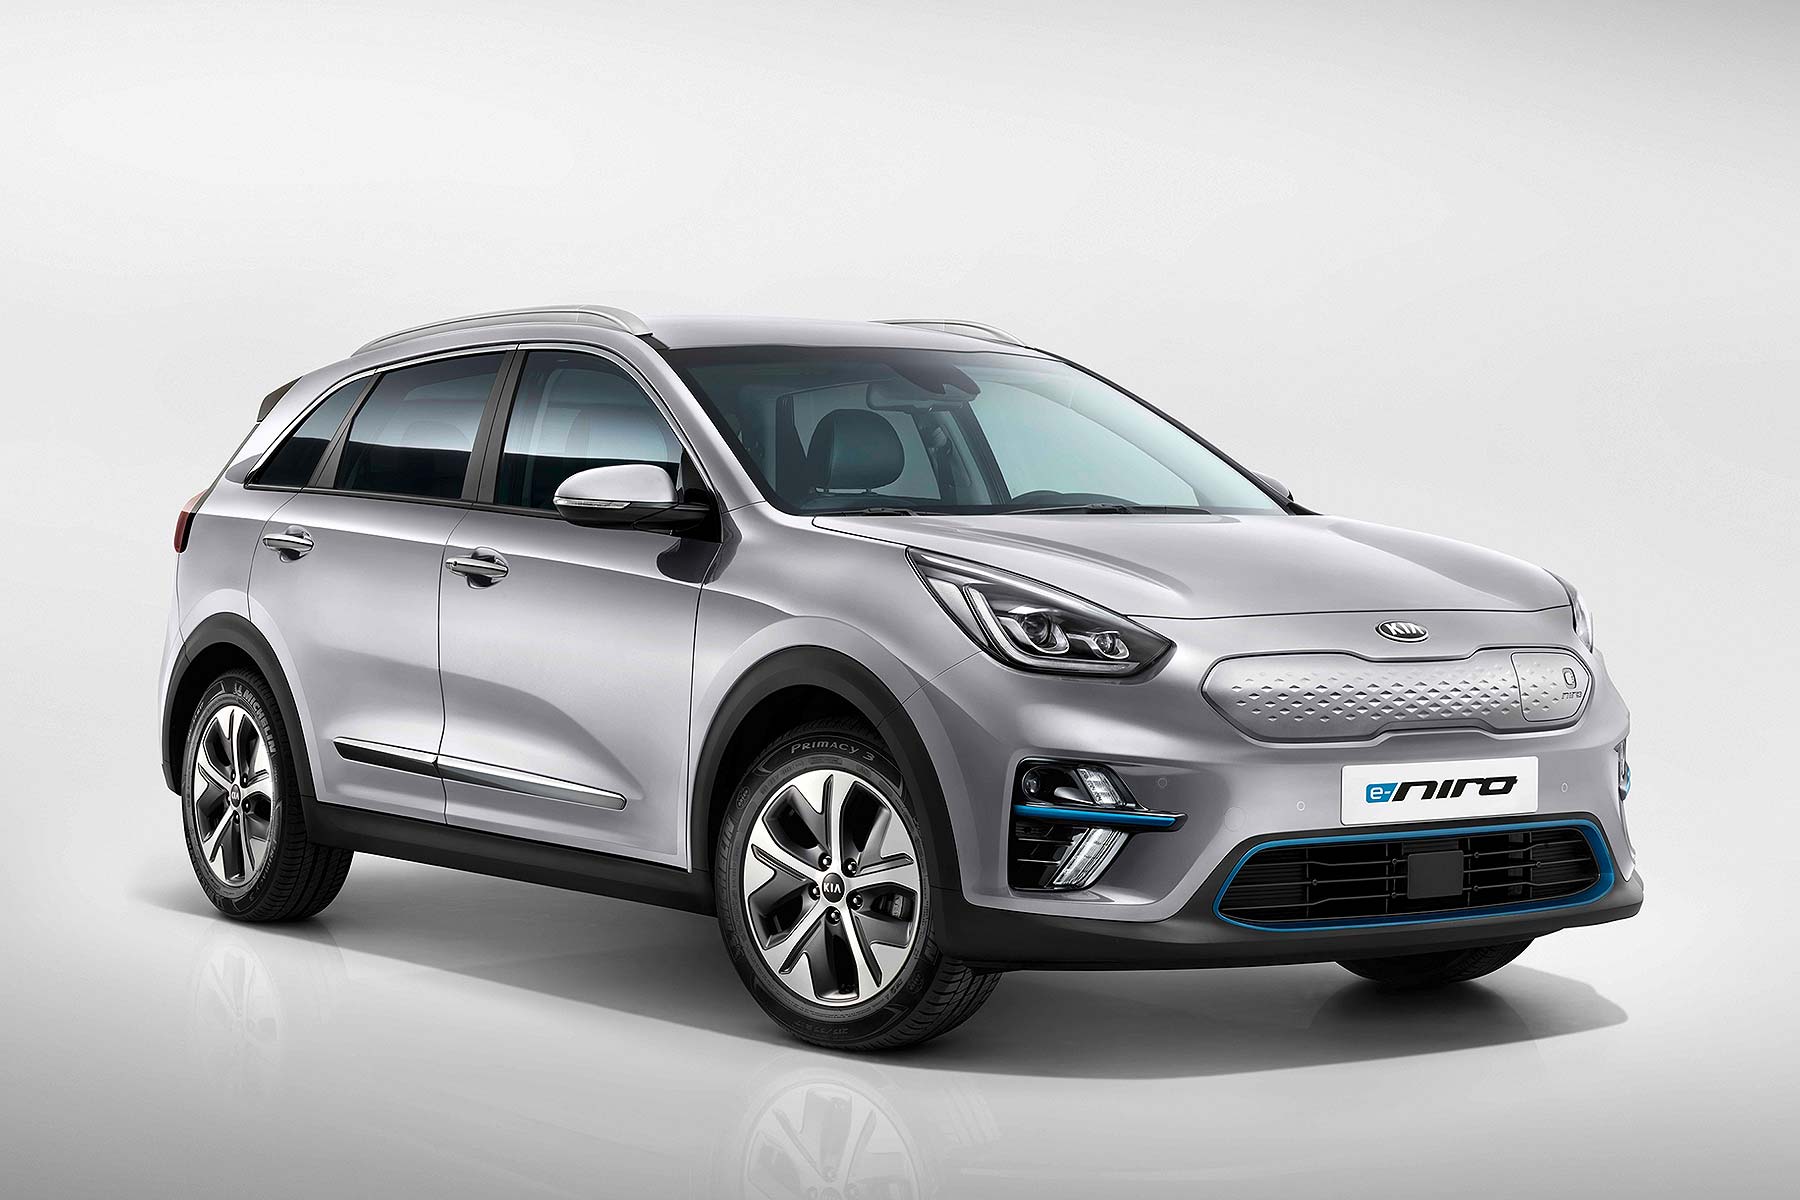 Kia corrects electric range of new e-Niro after test error - Motoring Research